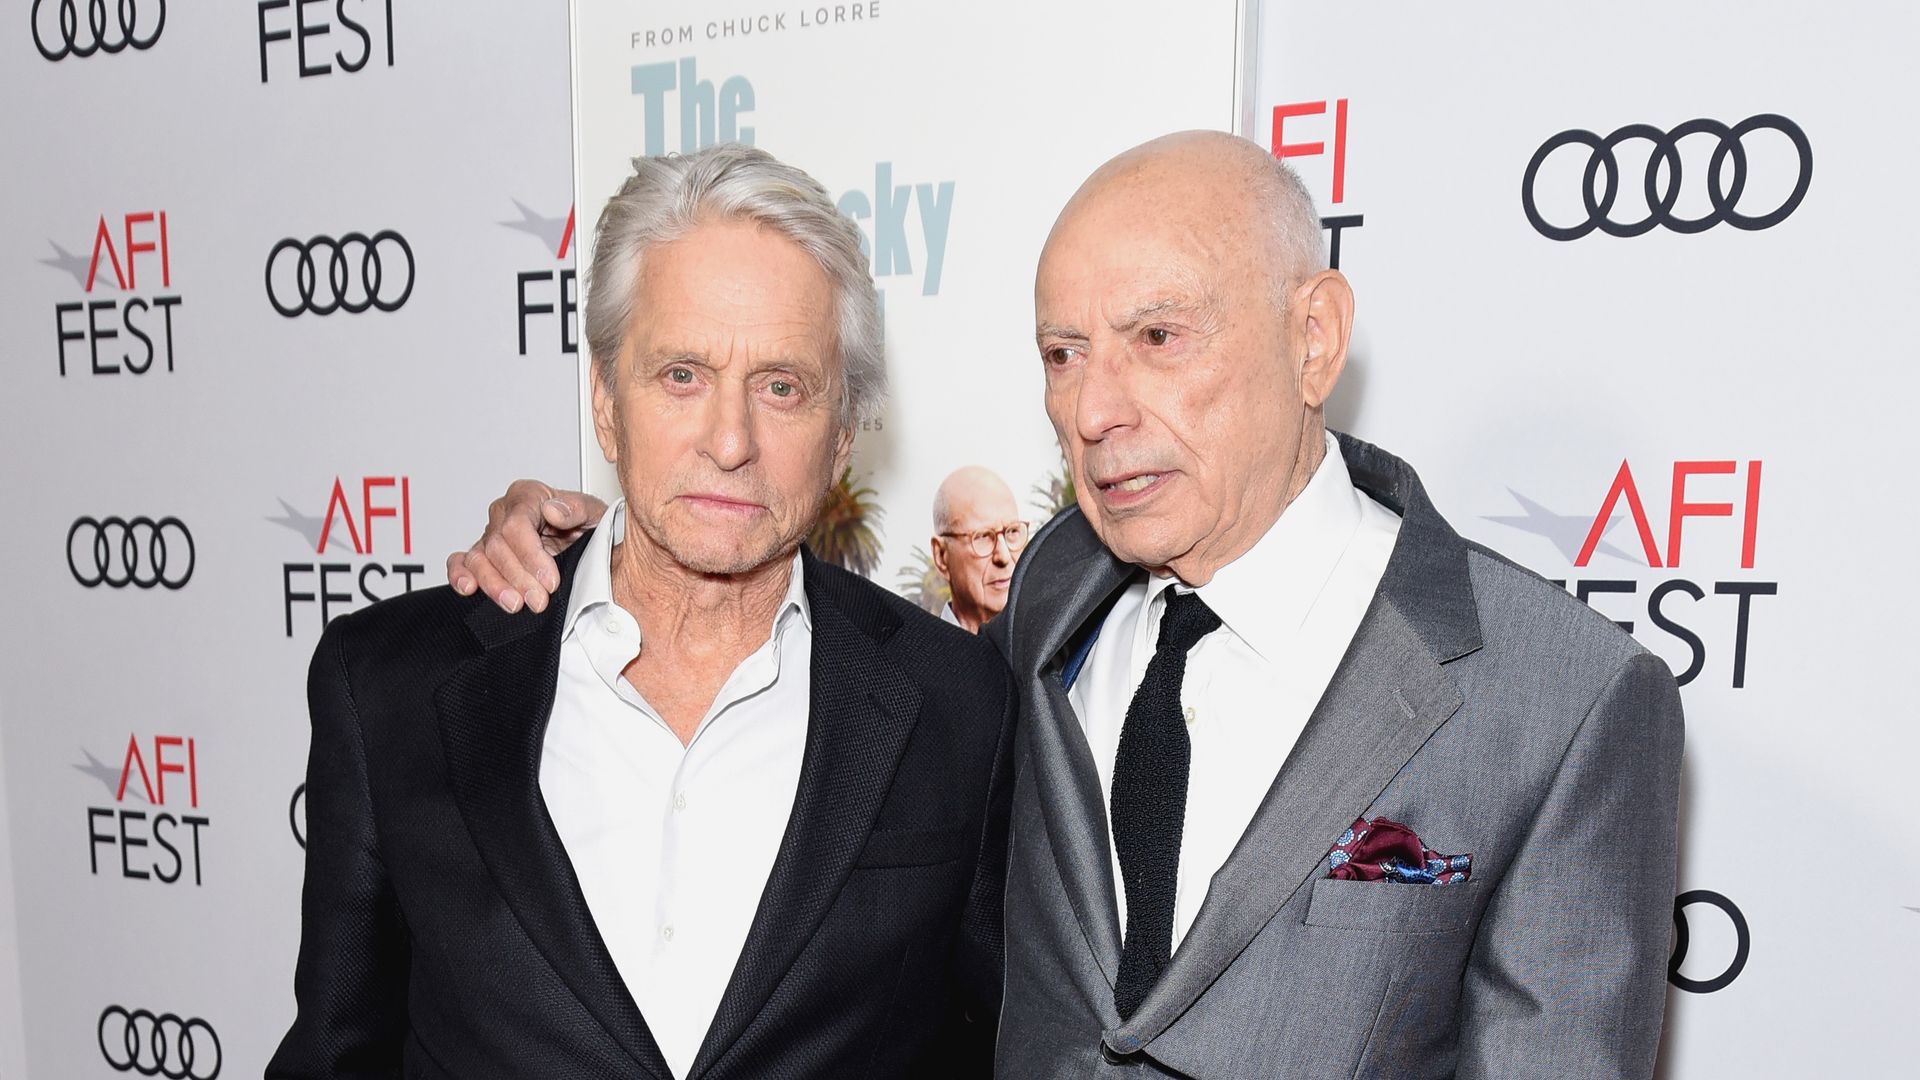 Michael Douglas (L) and Alan Arkin attend the Gala Screening of "The Kominsky Method" at AFI FEST 2018 Presented By Audi at TCL Chinese Theatre on November 10, 2018 in Hollywood, California.  (Photo by Presley Ann/Getty Images for AFI)